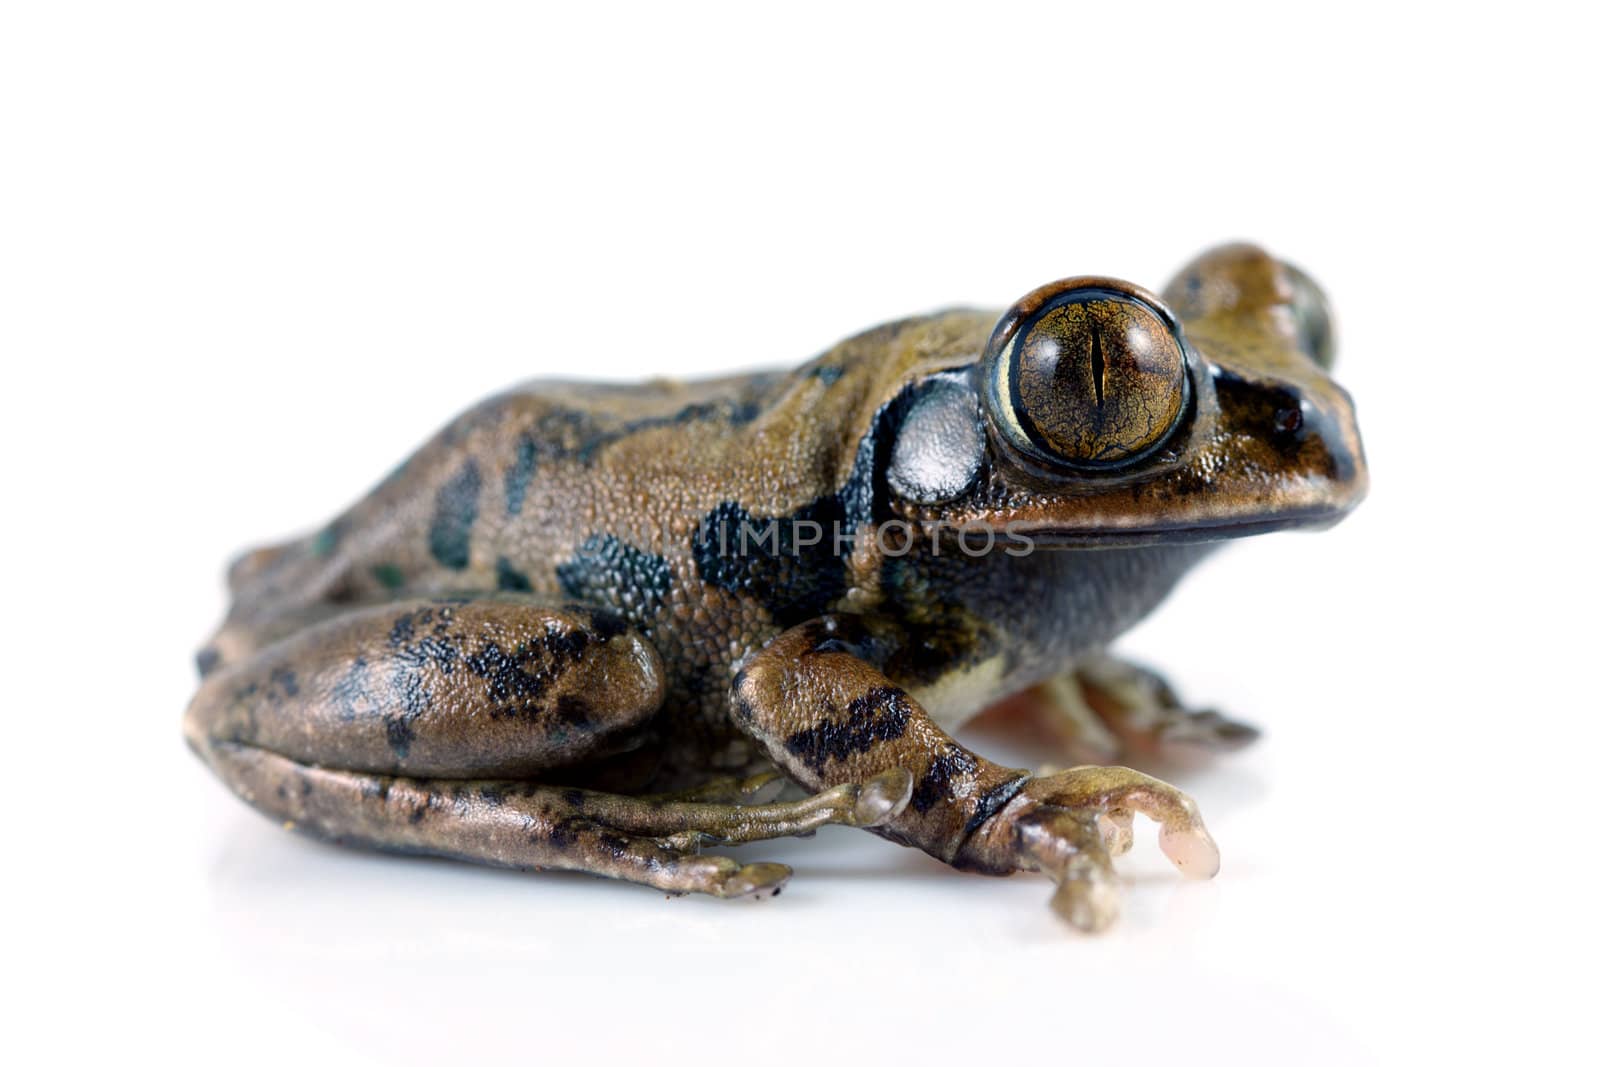 A Peacock Frog (Leptopelis vermiculatus). Studio  shot on a solid white background. Also known as the Big-eyed Tree Frog, this frog inhabits the tropical rainforests in the African country of Tanzania. 